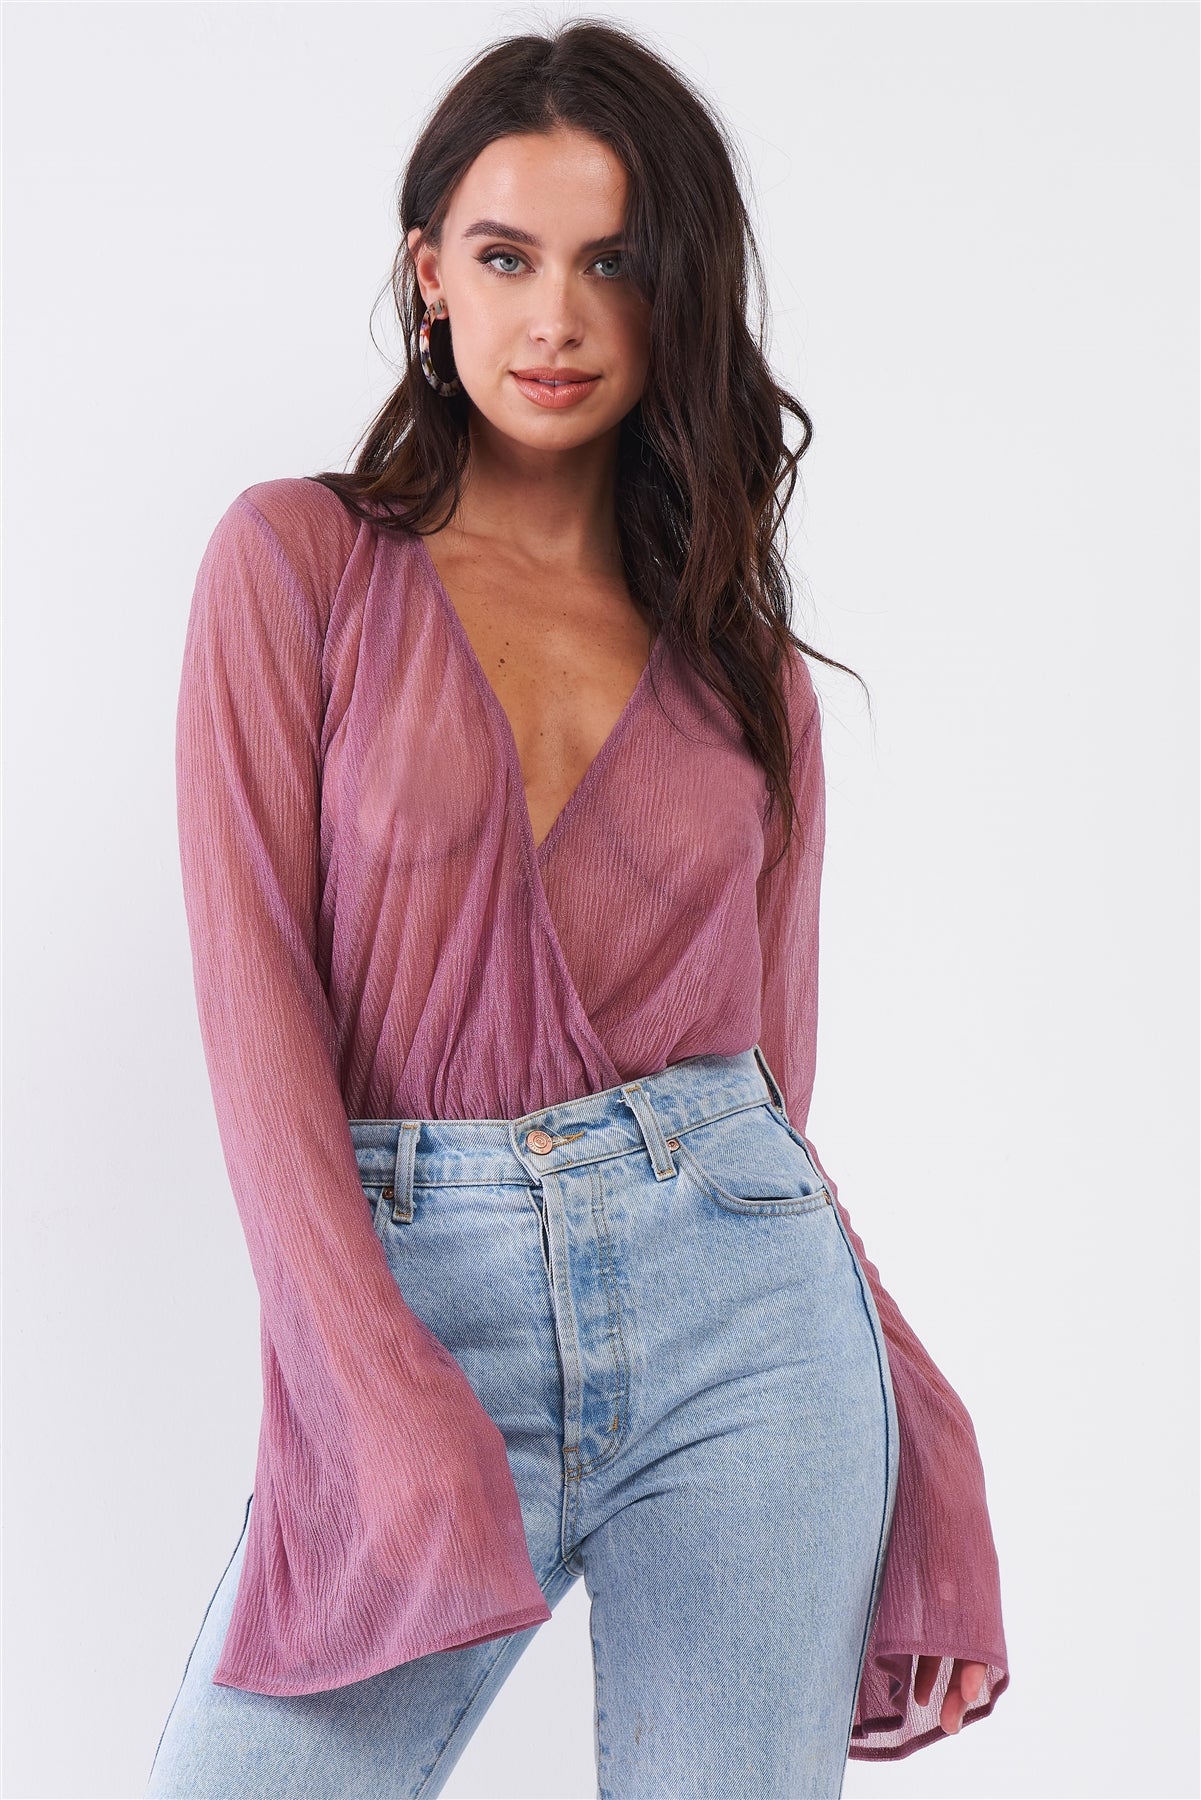 Eat Your Heart Out Bell Sleeve Plunge V Neck Bodysuit